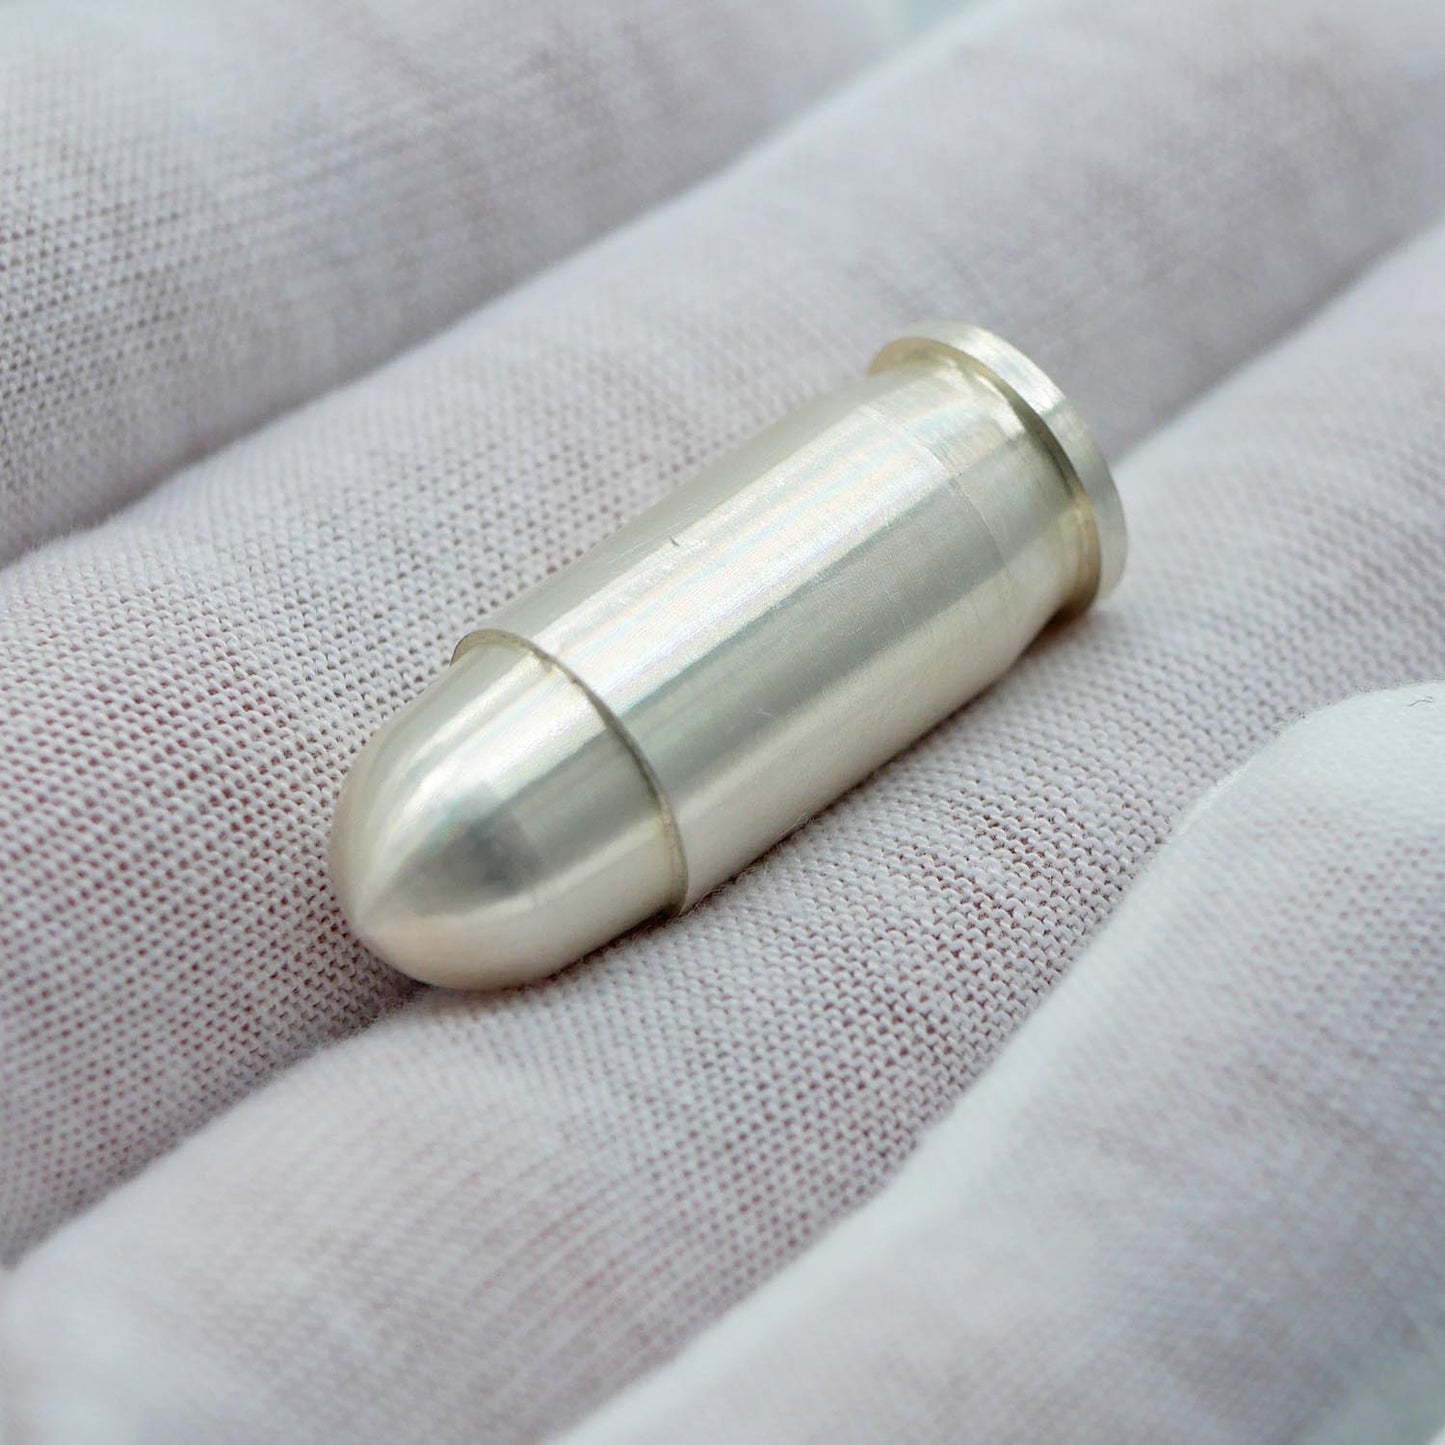 Solid Silver Bullet: One Ounce